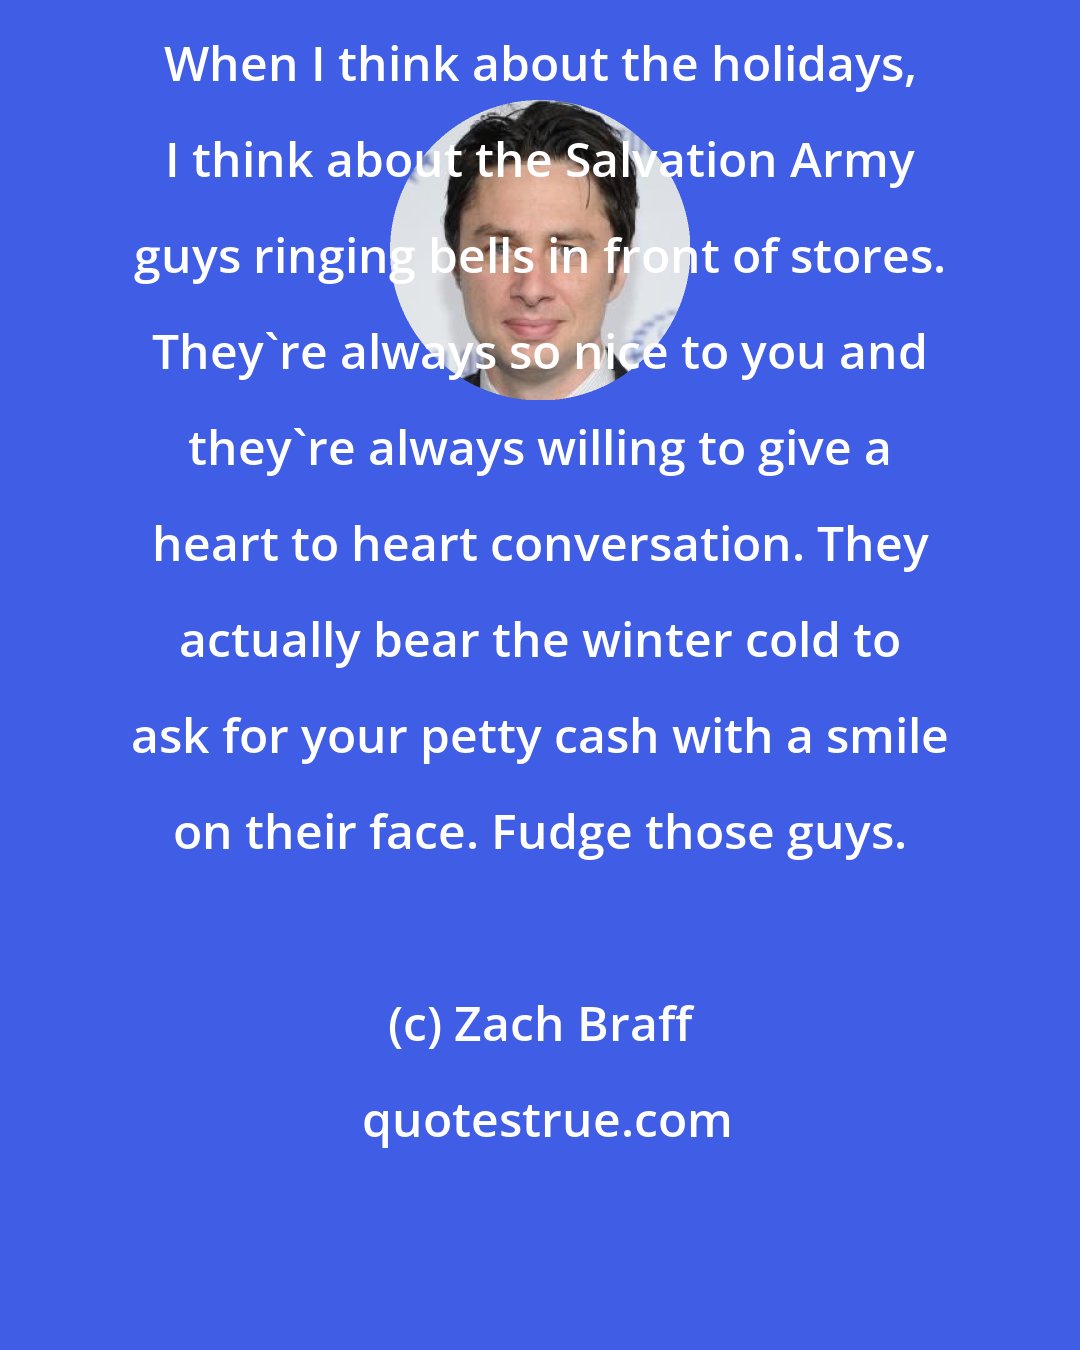 Zach Braff: When I think about the holidays, I think about the Salvation Army guys ringing bells in front of stores. They're always so nice to you and they're always willing to give a heart to heart conversation. They actually bear the winter cold to ask for your petty cash with a smile on their face. Fudge those guys.